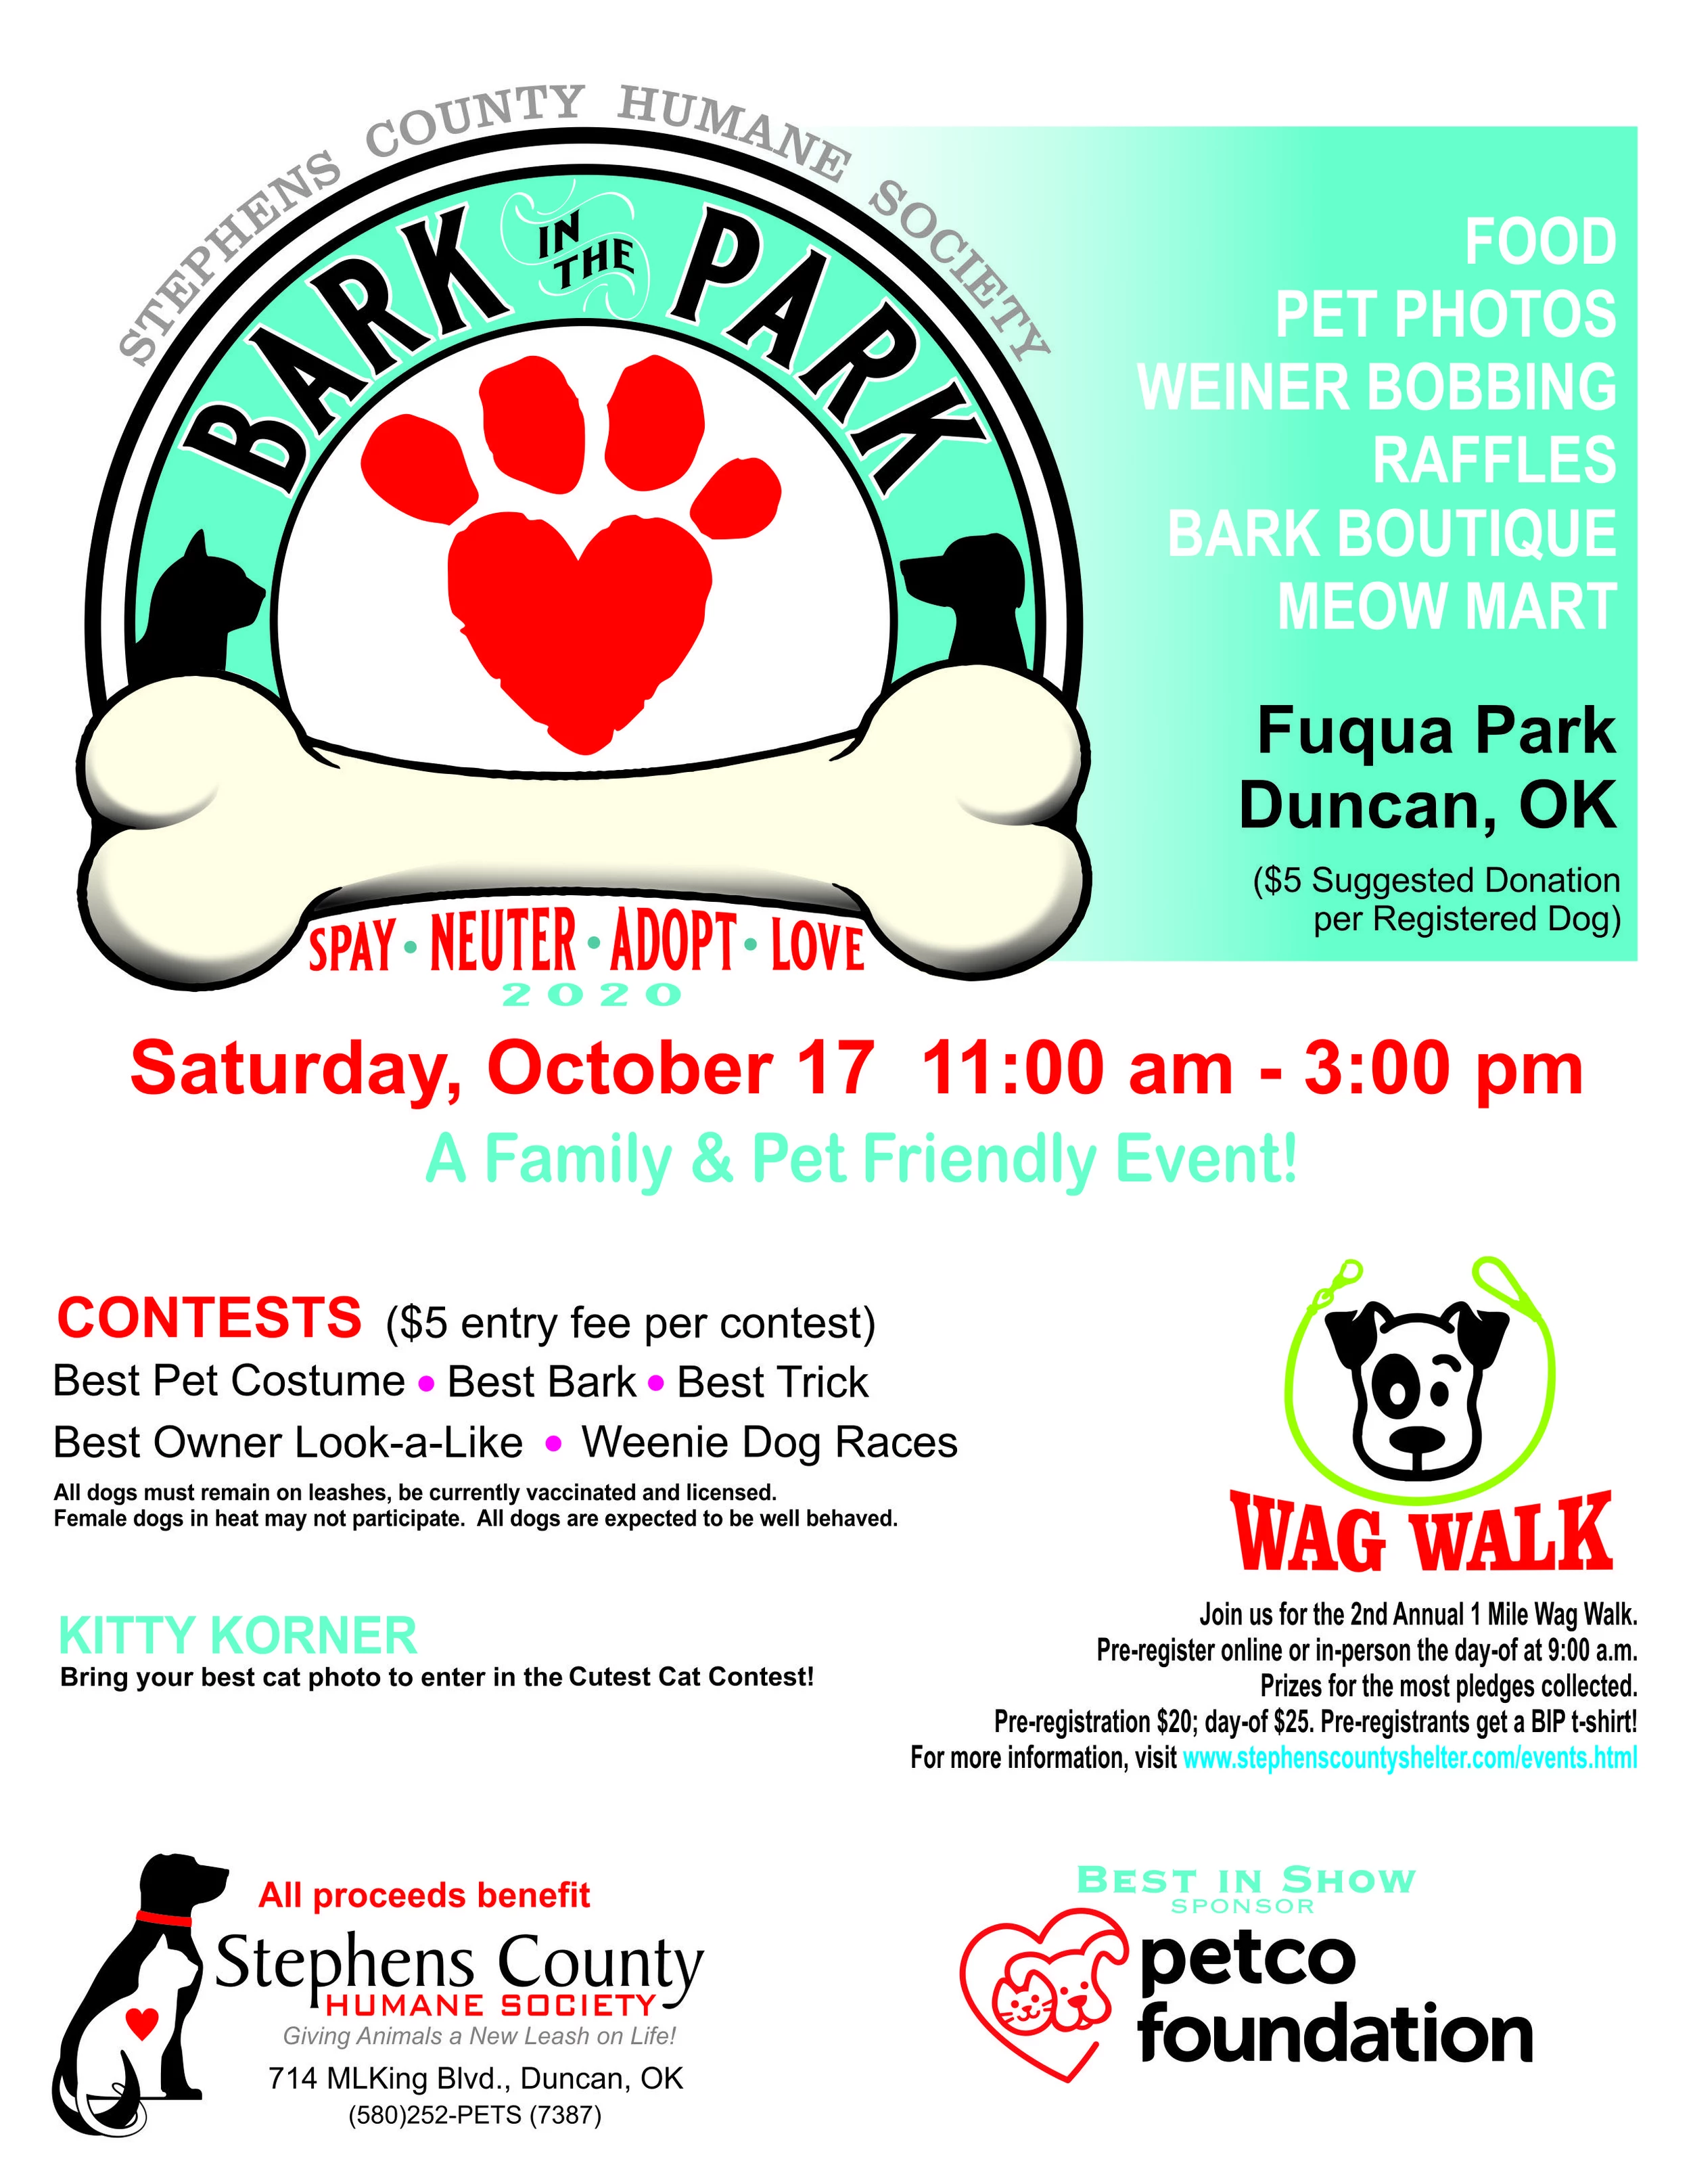 Duncan "Bark in the Park" Will Be a Doggone Good Time!